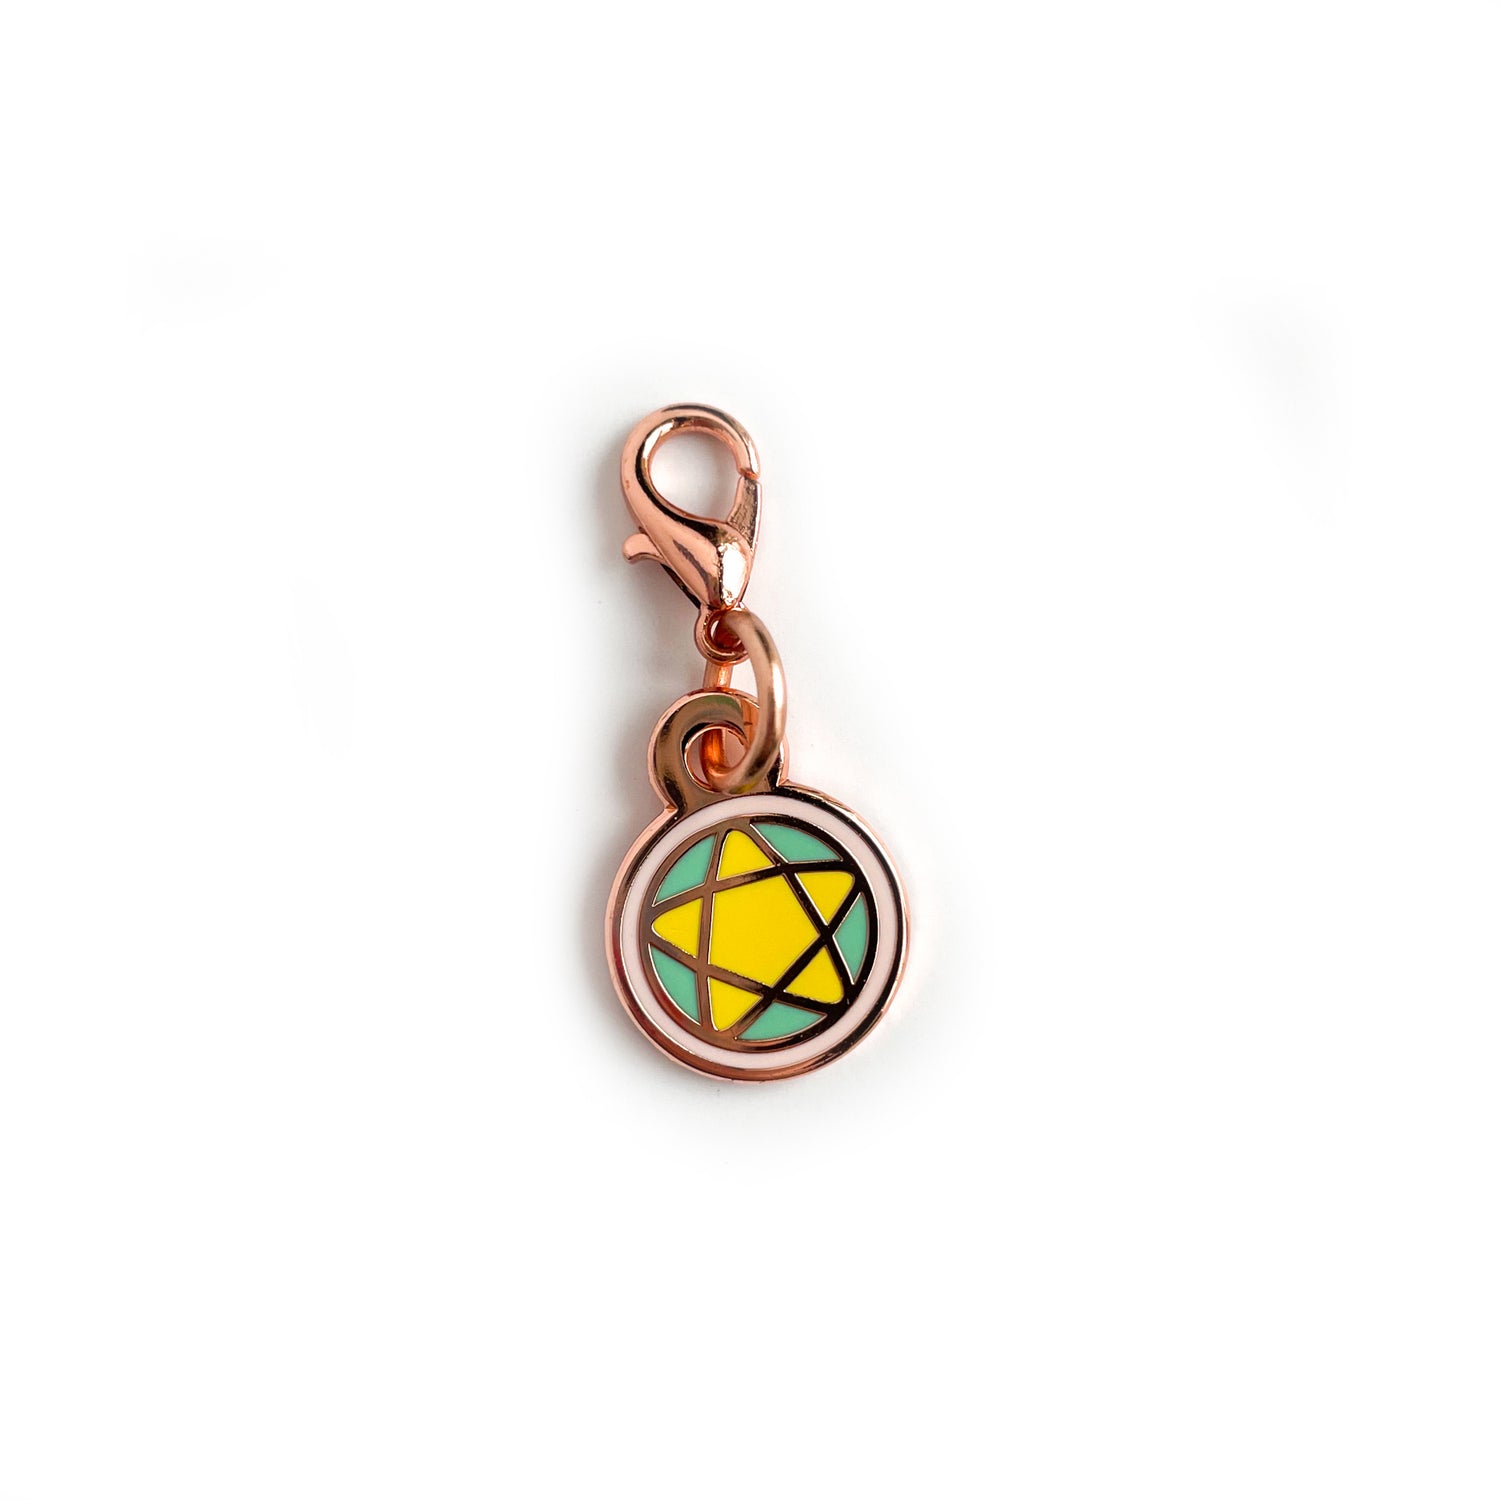 A lobster claw clasp charm of a pentacle in pastel colors and rose gold colored metal.